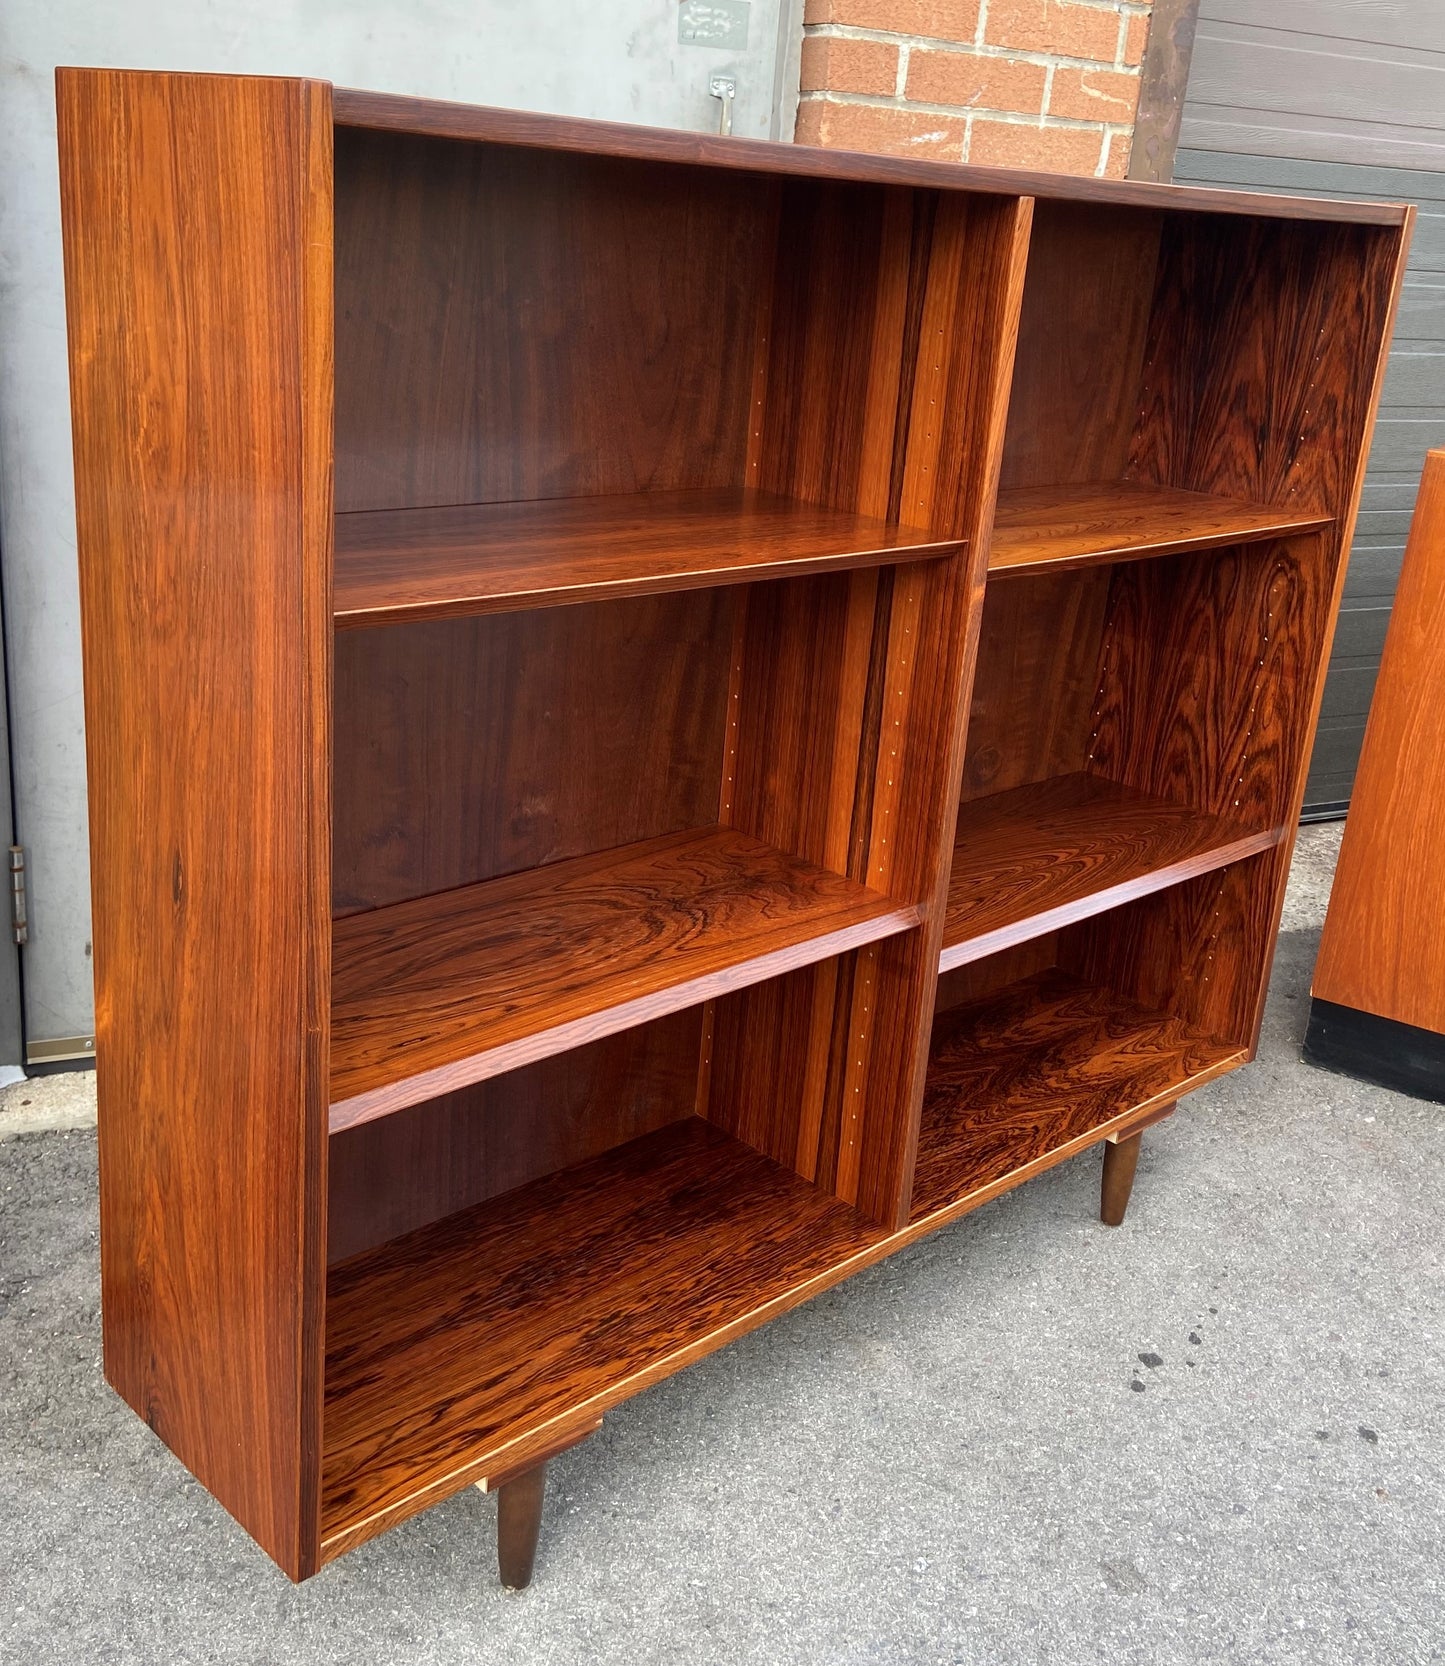 RESTORED Danish Mid Century Modern Rosewood Bookcase 54.5" by Poul Hundevad